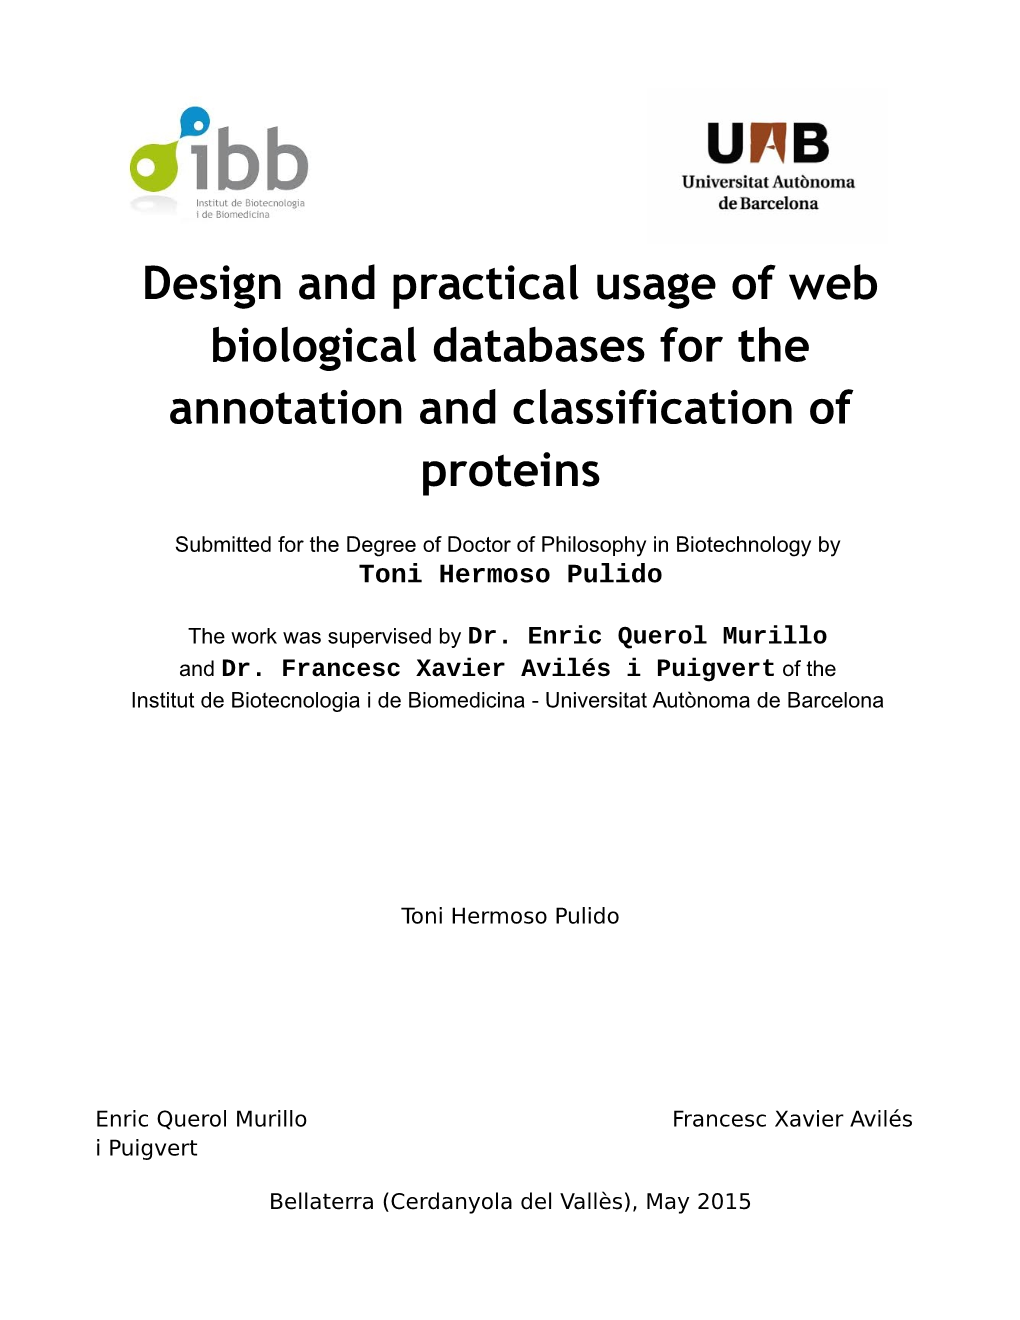 Design and Practical Usage of Web Biological Databases for the Annotation and Classification of Proteins